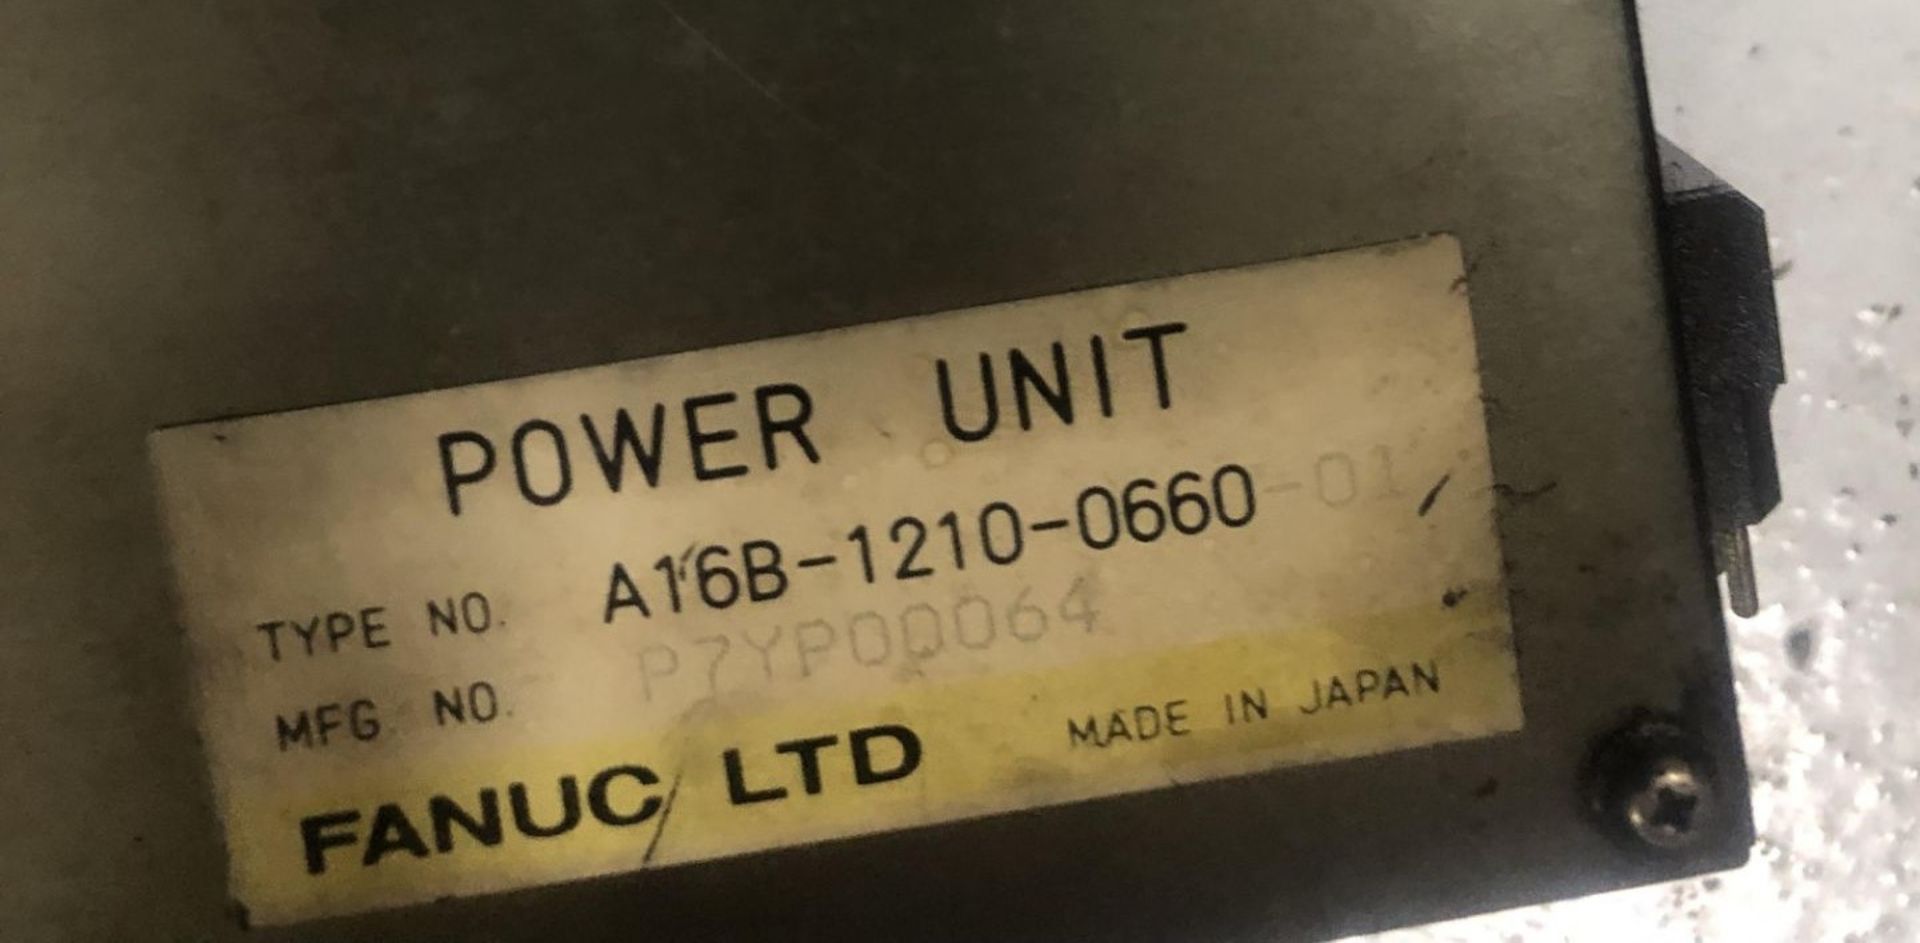 LOT OF 2 Fanuc Power Supplies, A16B-1210-0660 & A16B-1211-0850 - Image 8 of 8